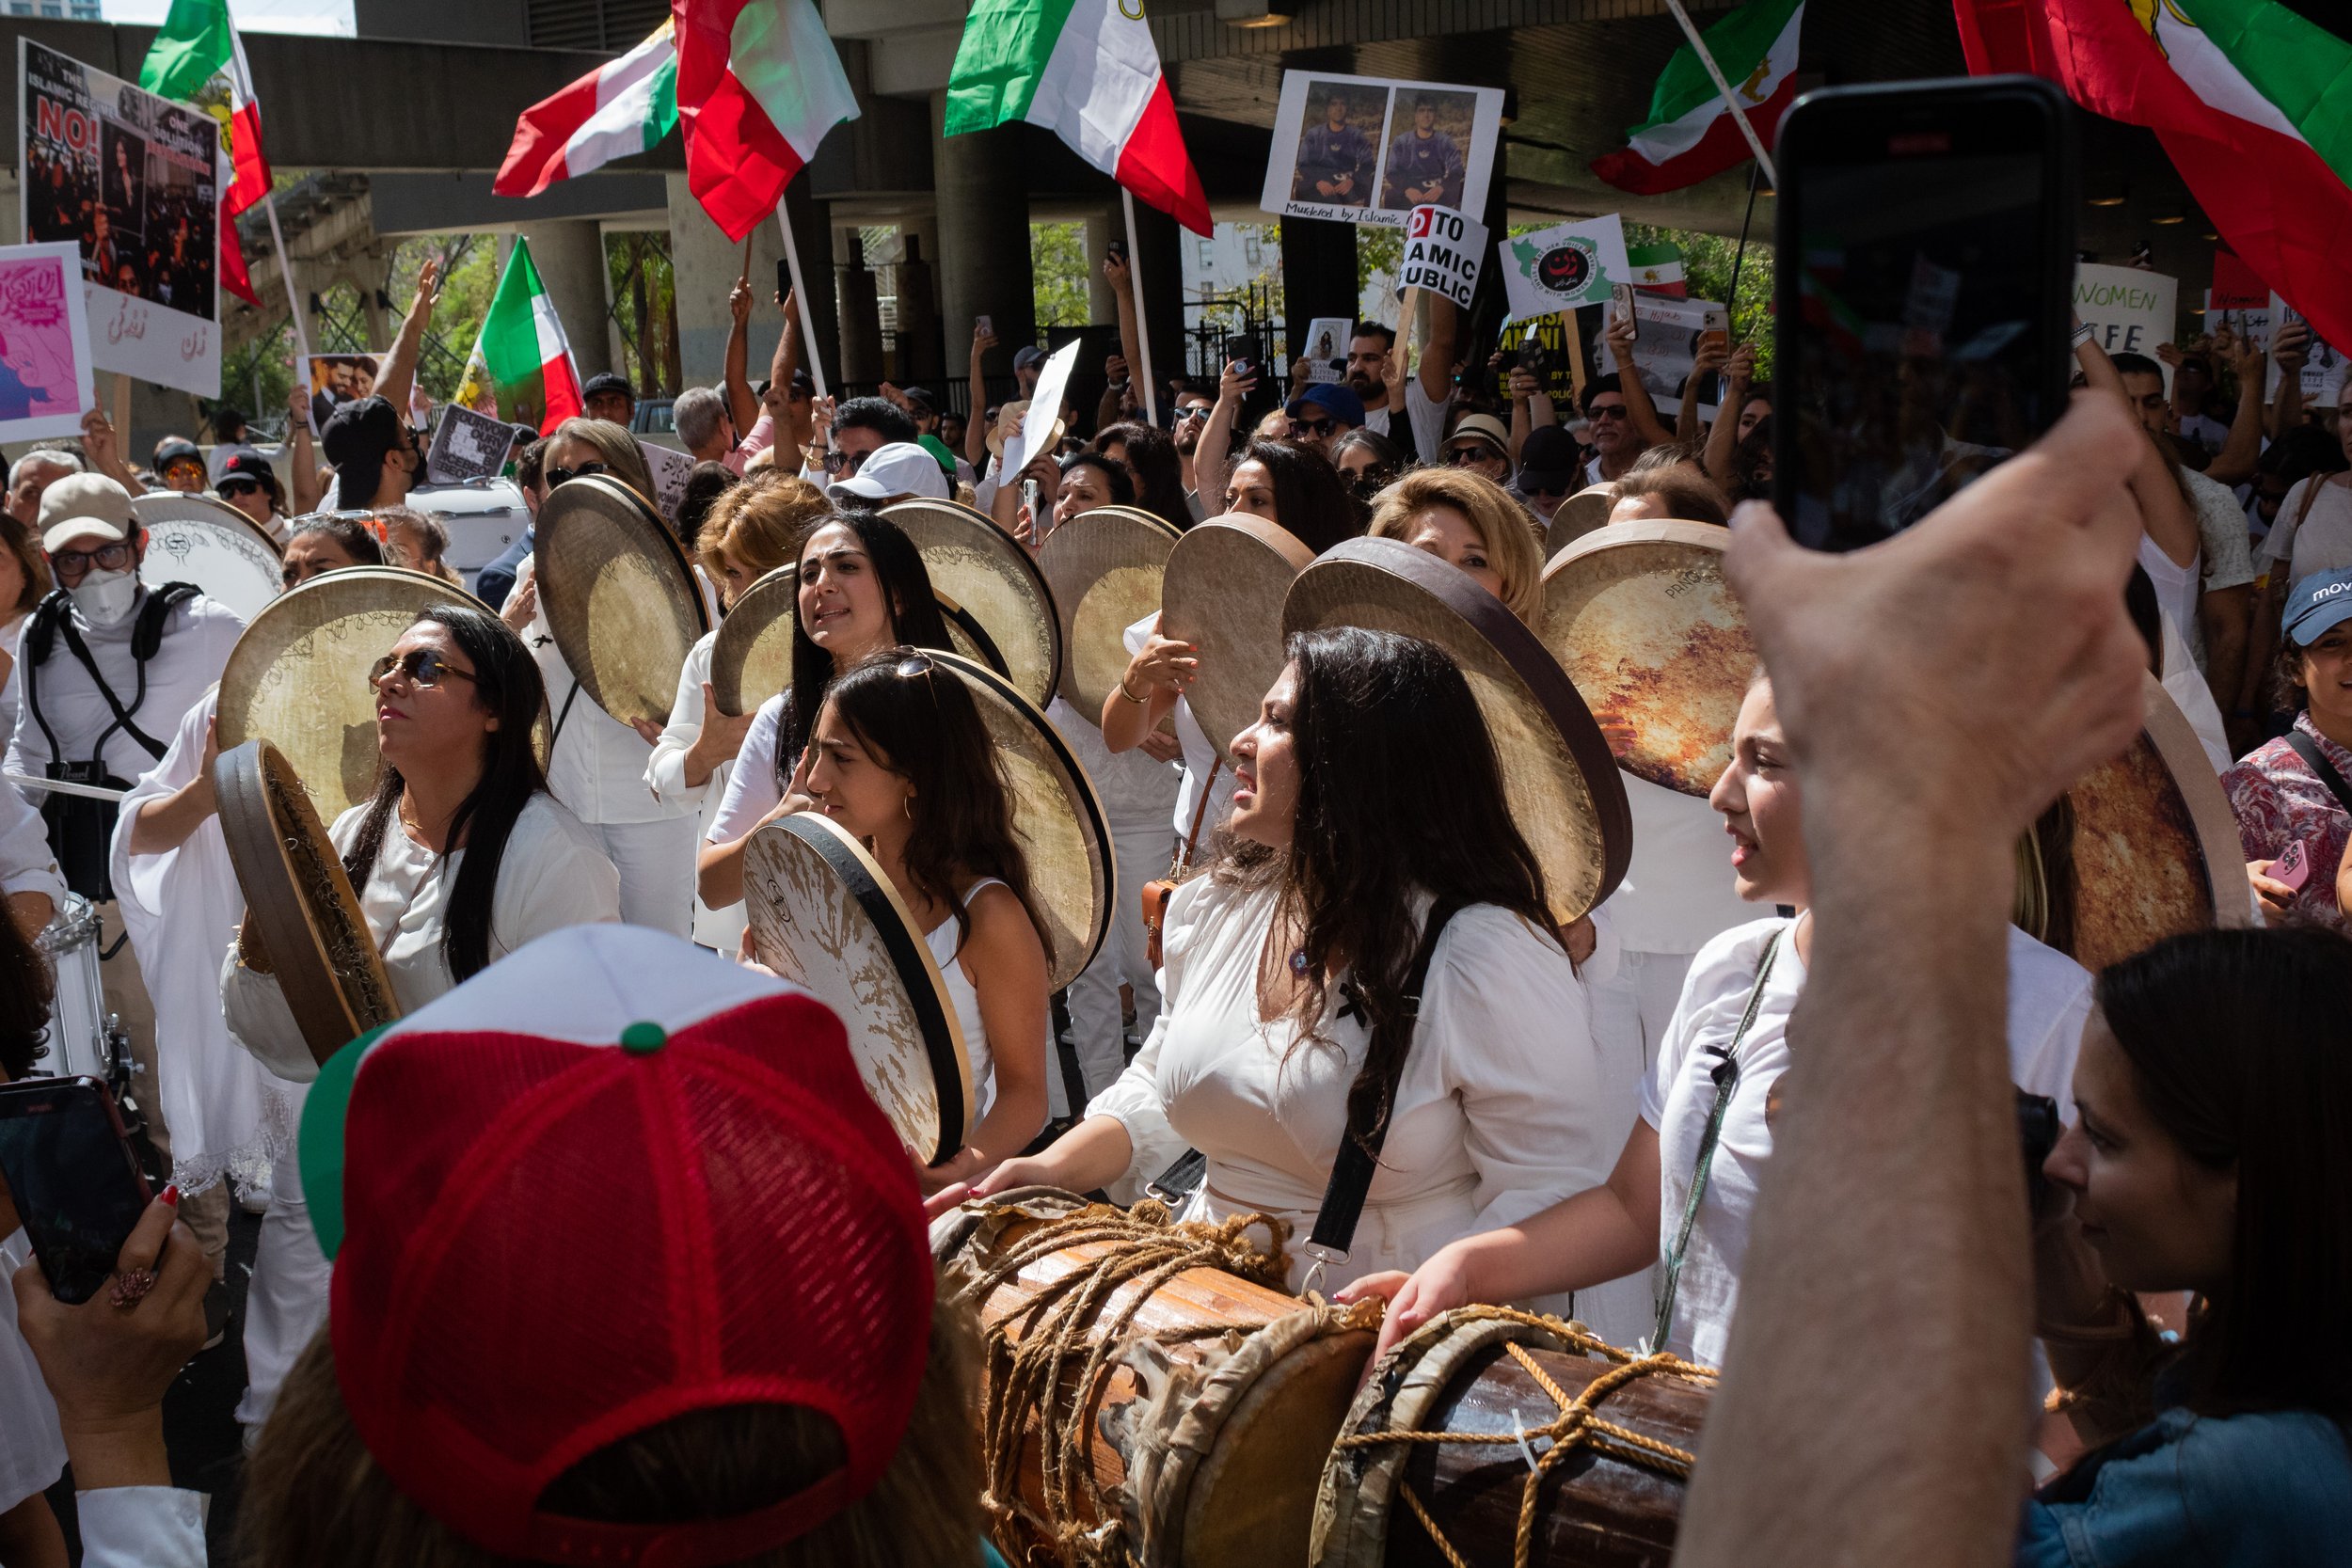  Musicians playing music during the Freedom For Iran rally as they marched down Olive St from Pershing Square to Los Angeles City Hall. The rally marched from Pershing Square to Los Angeles City Hall with at least a thousand people in attendance as w